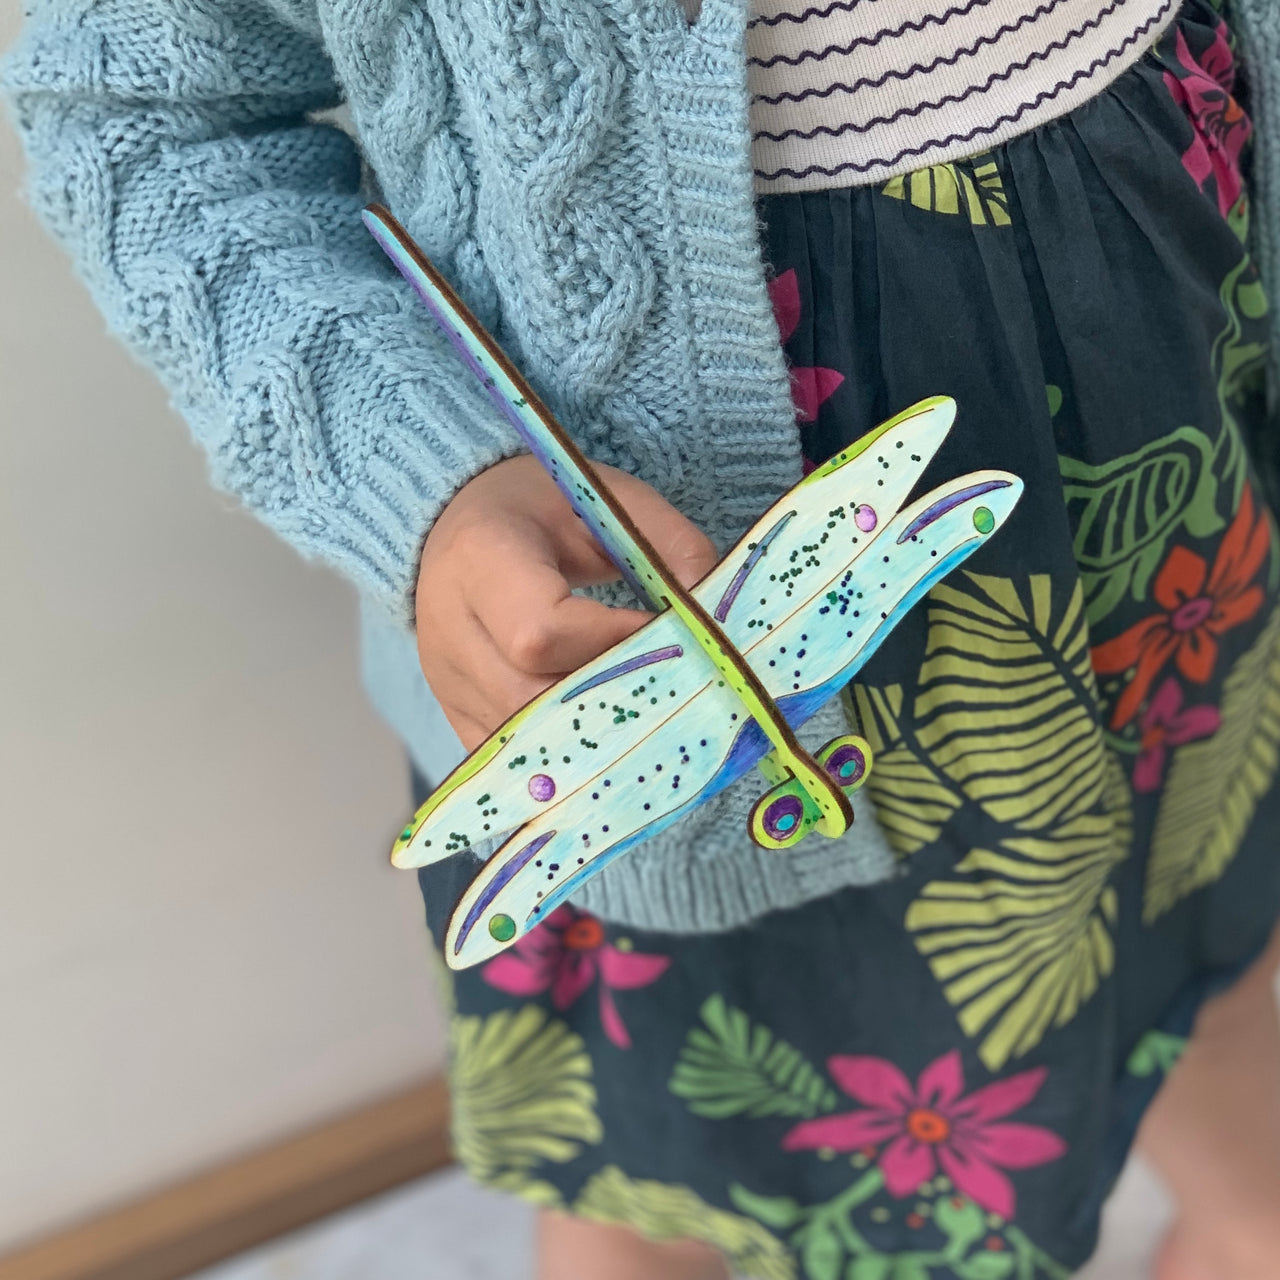 make your own dragonfly glider activity kit